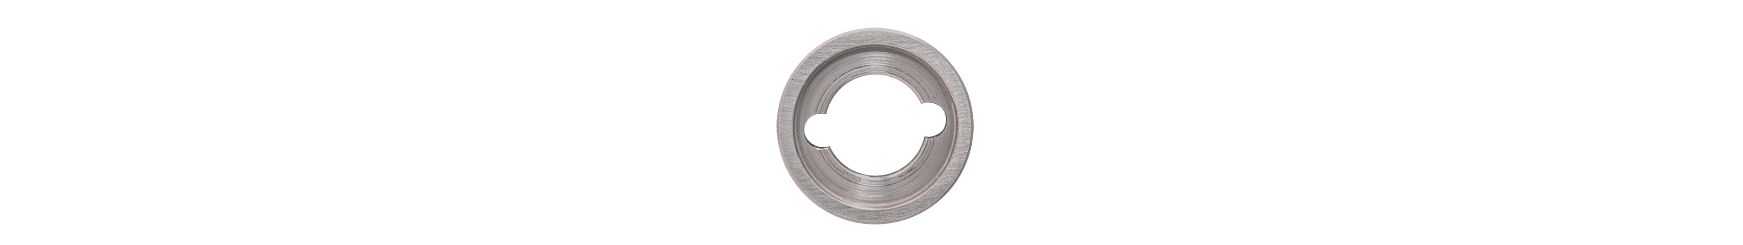 Finishing Core Tools-Large Replacement Washers